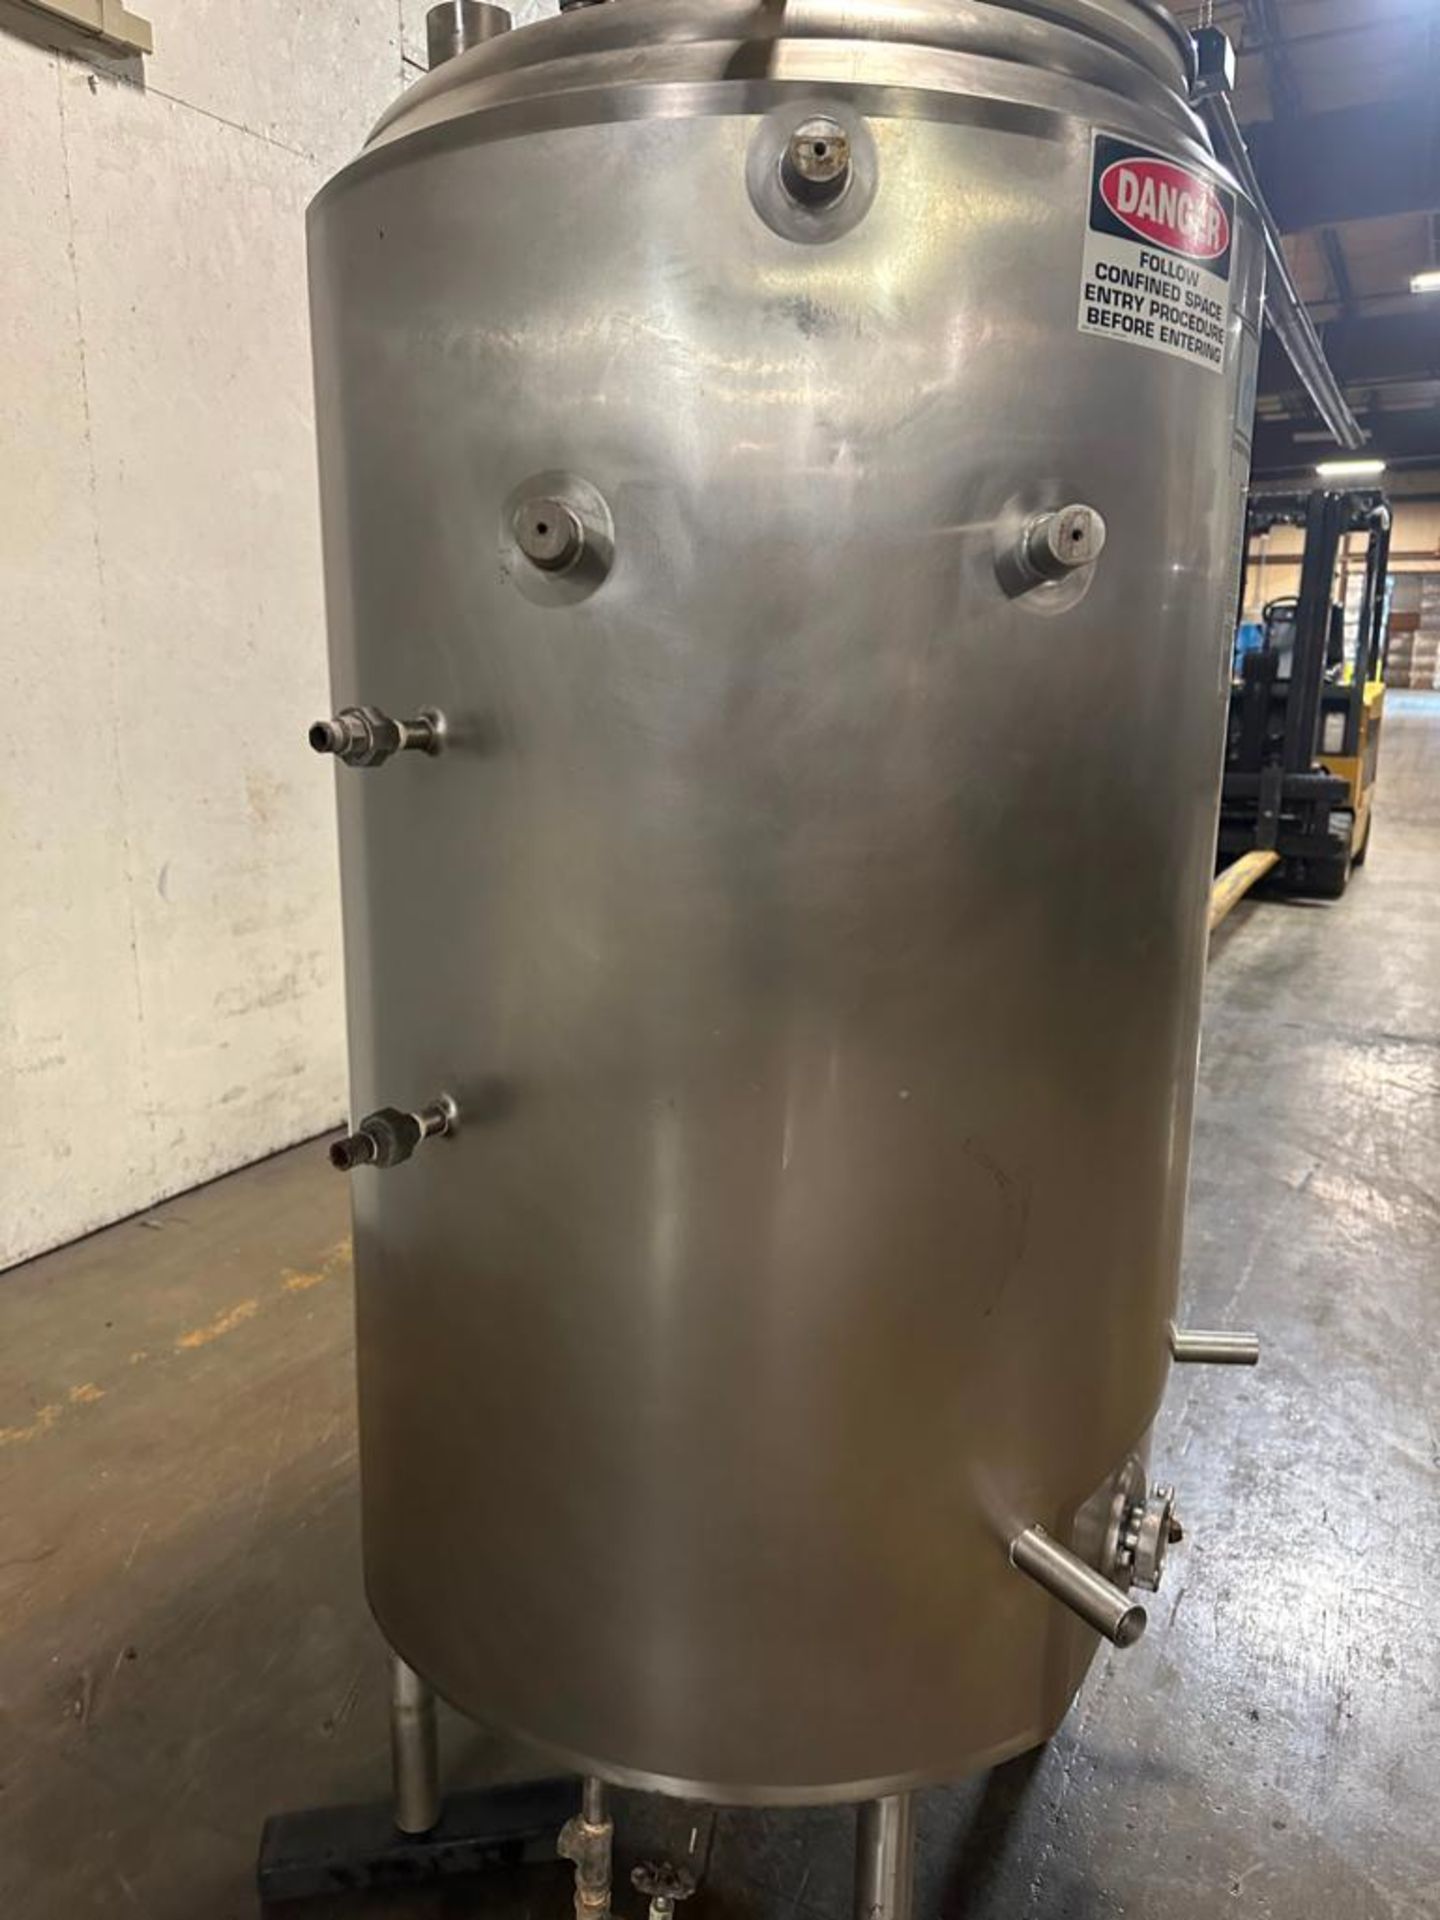 Cherry-Burrell 200 Gallon Jacketed S/S Tank - Rigging Fee: Contact HDC - Image 3 of 3